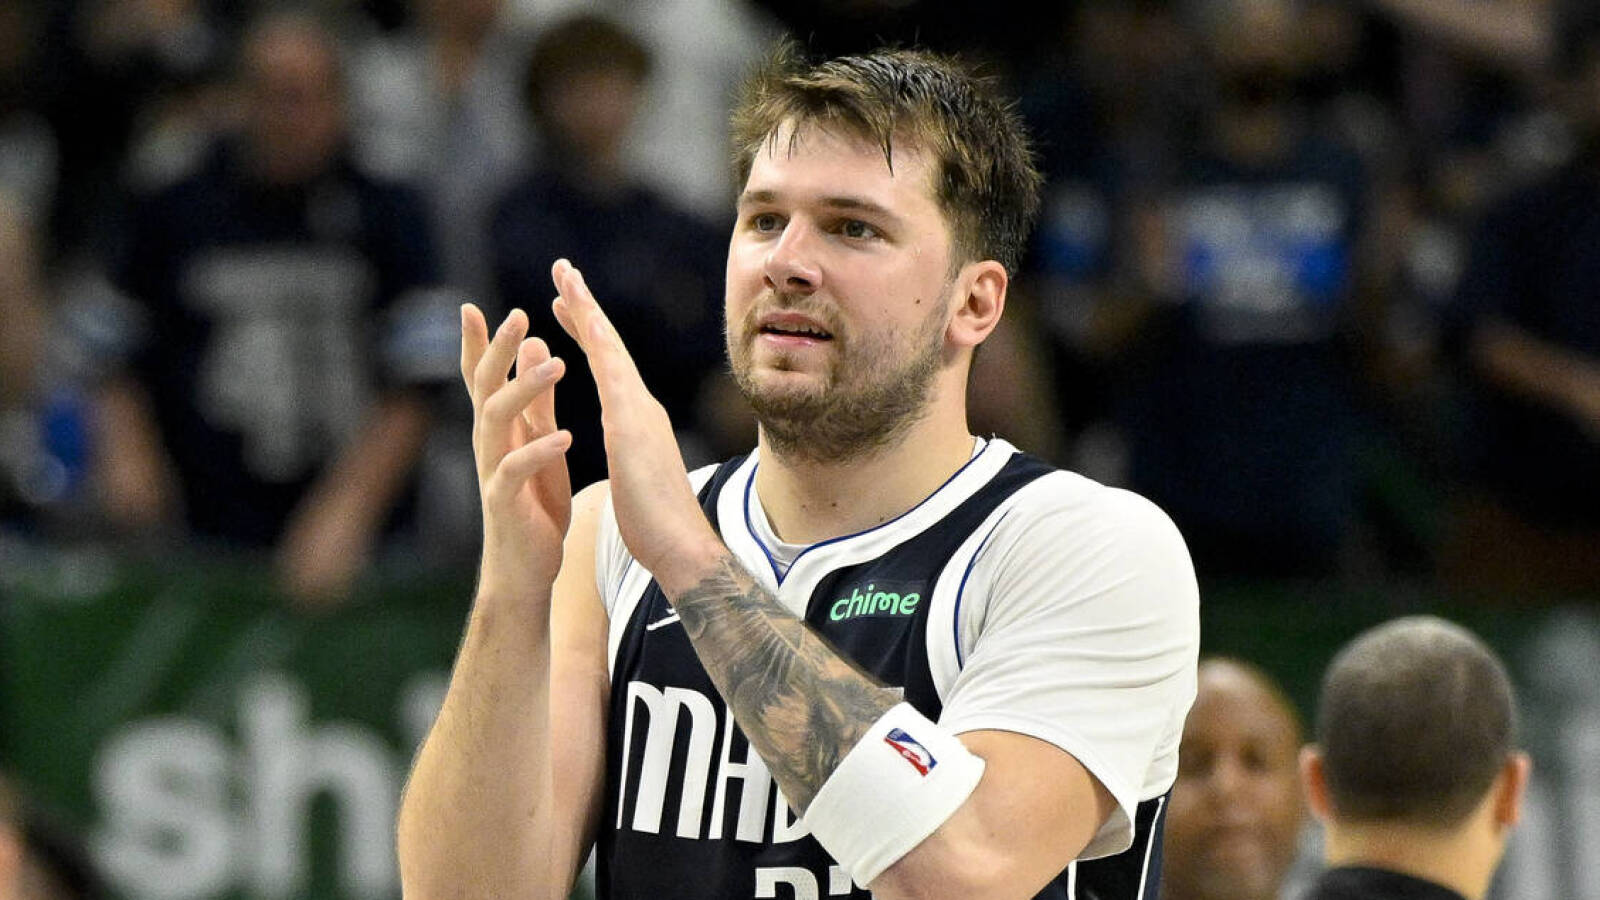 Watch: Luka Doncic channels inner MJ with super cool entrance